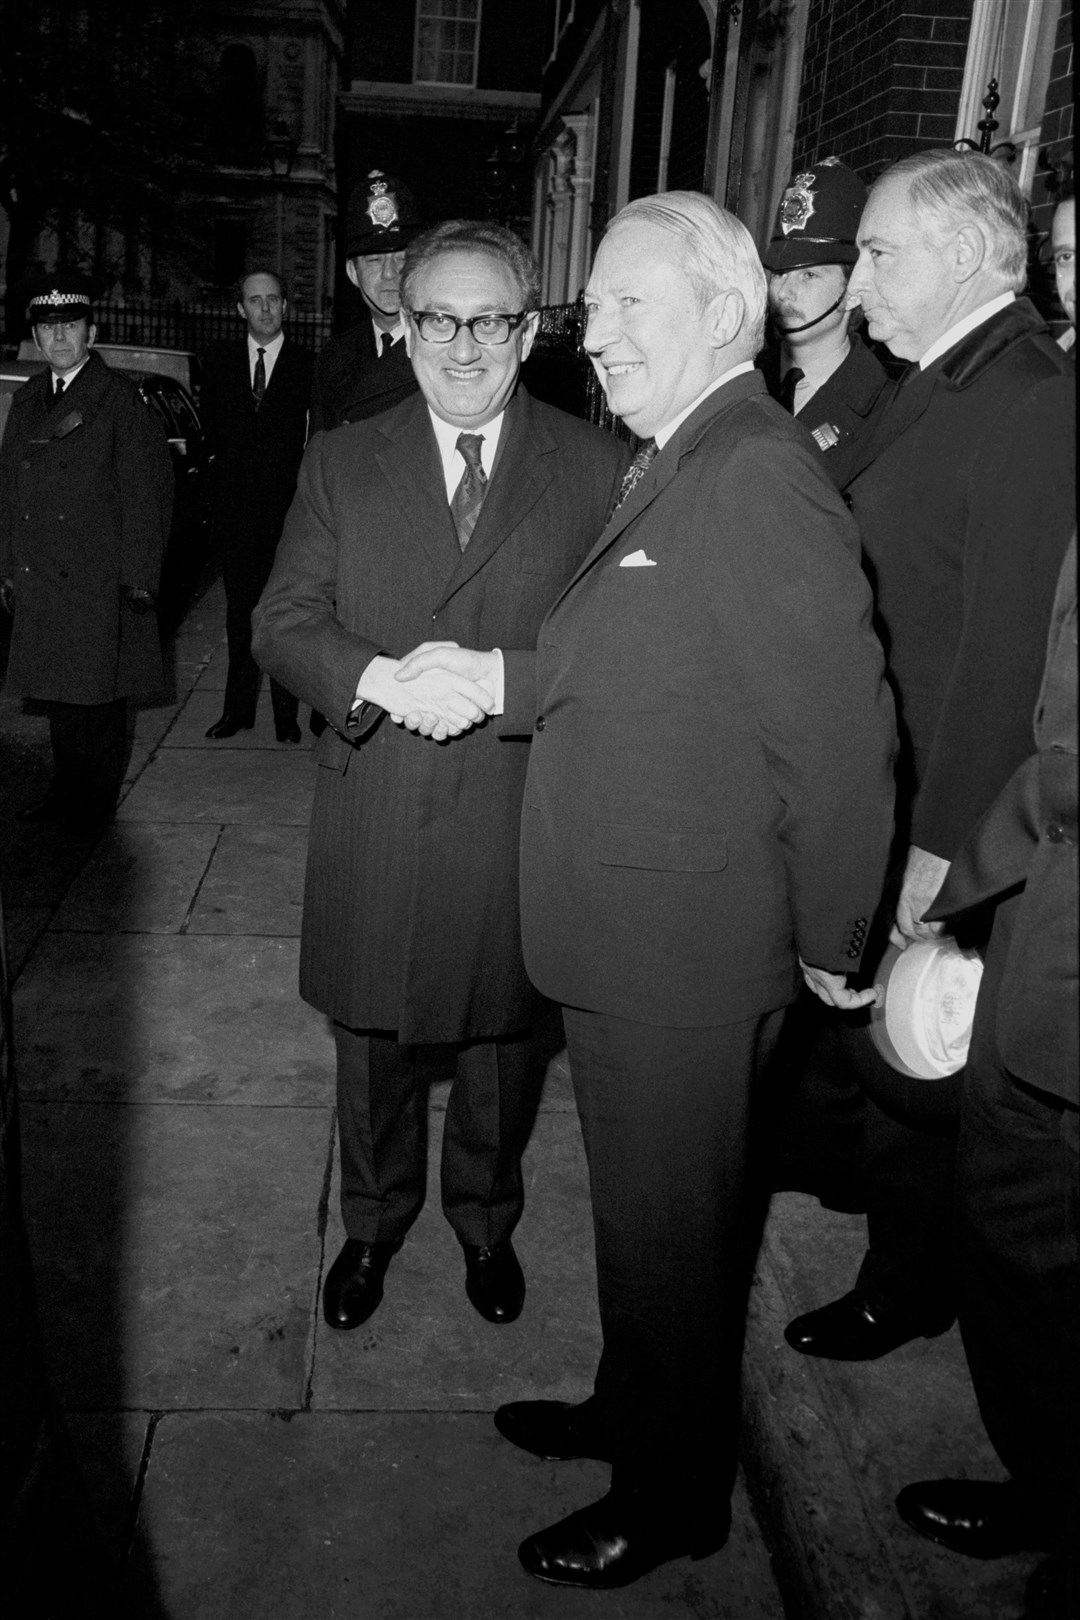 Then-prime minister Ted Heath shakes Mr Kissinger’s hand in 1973 after a working lunch at 10 Downing Street (PA)